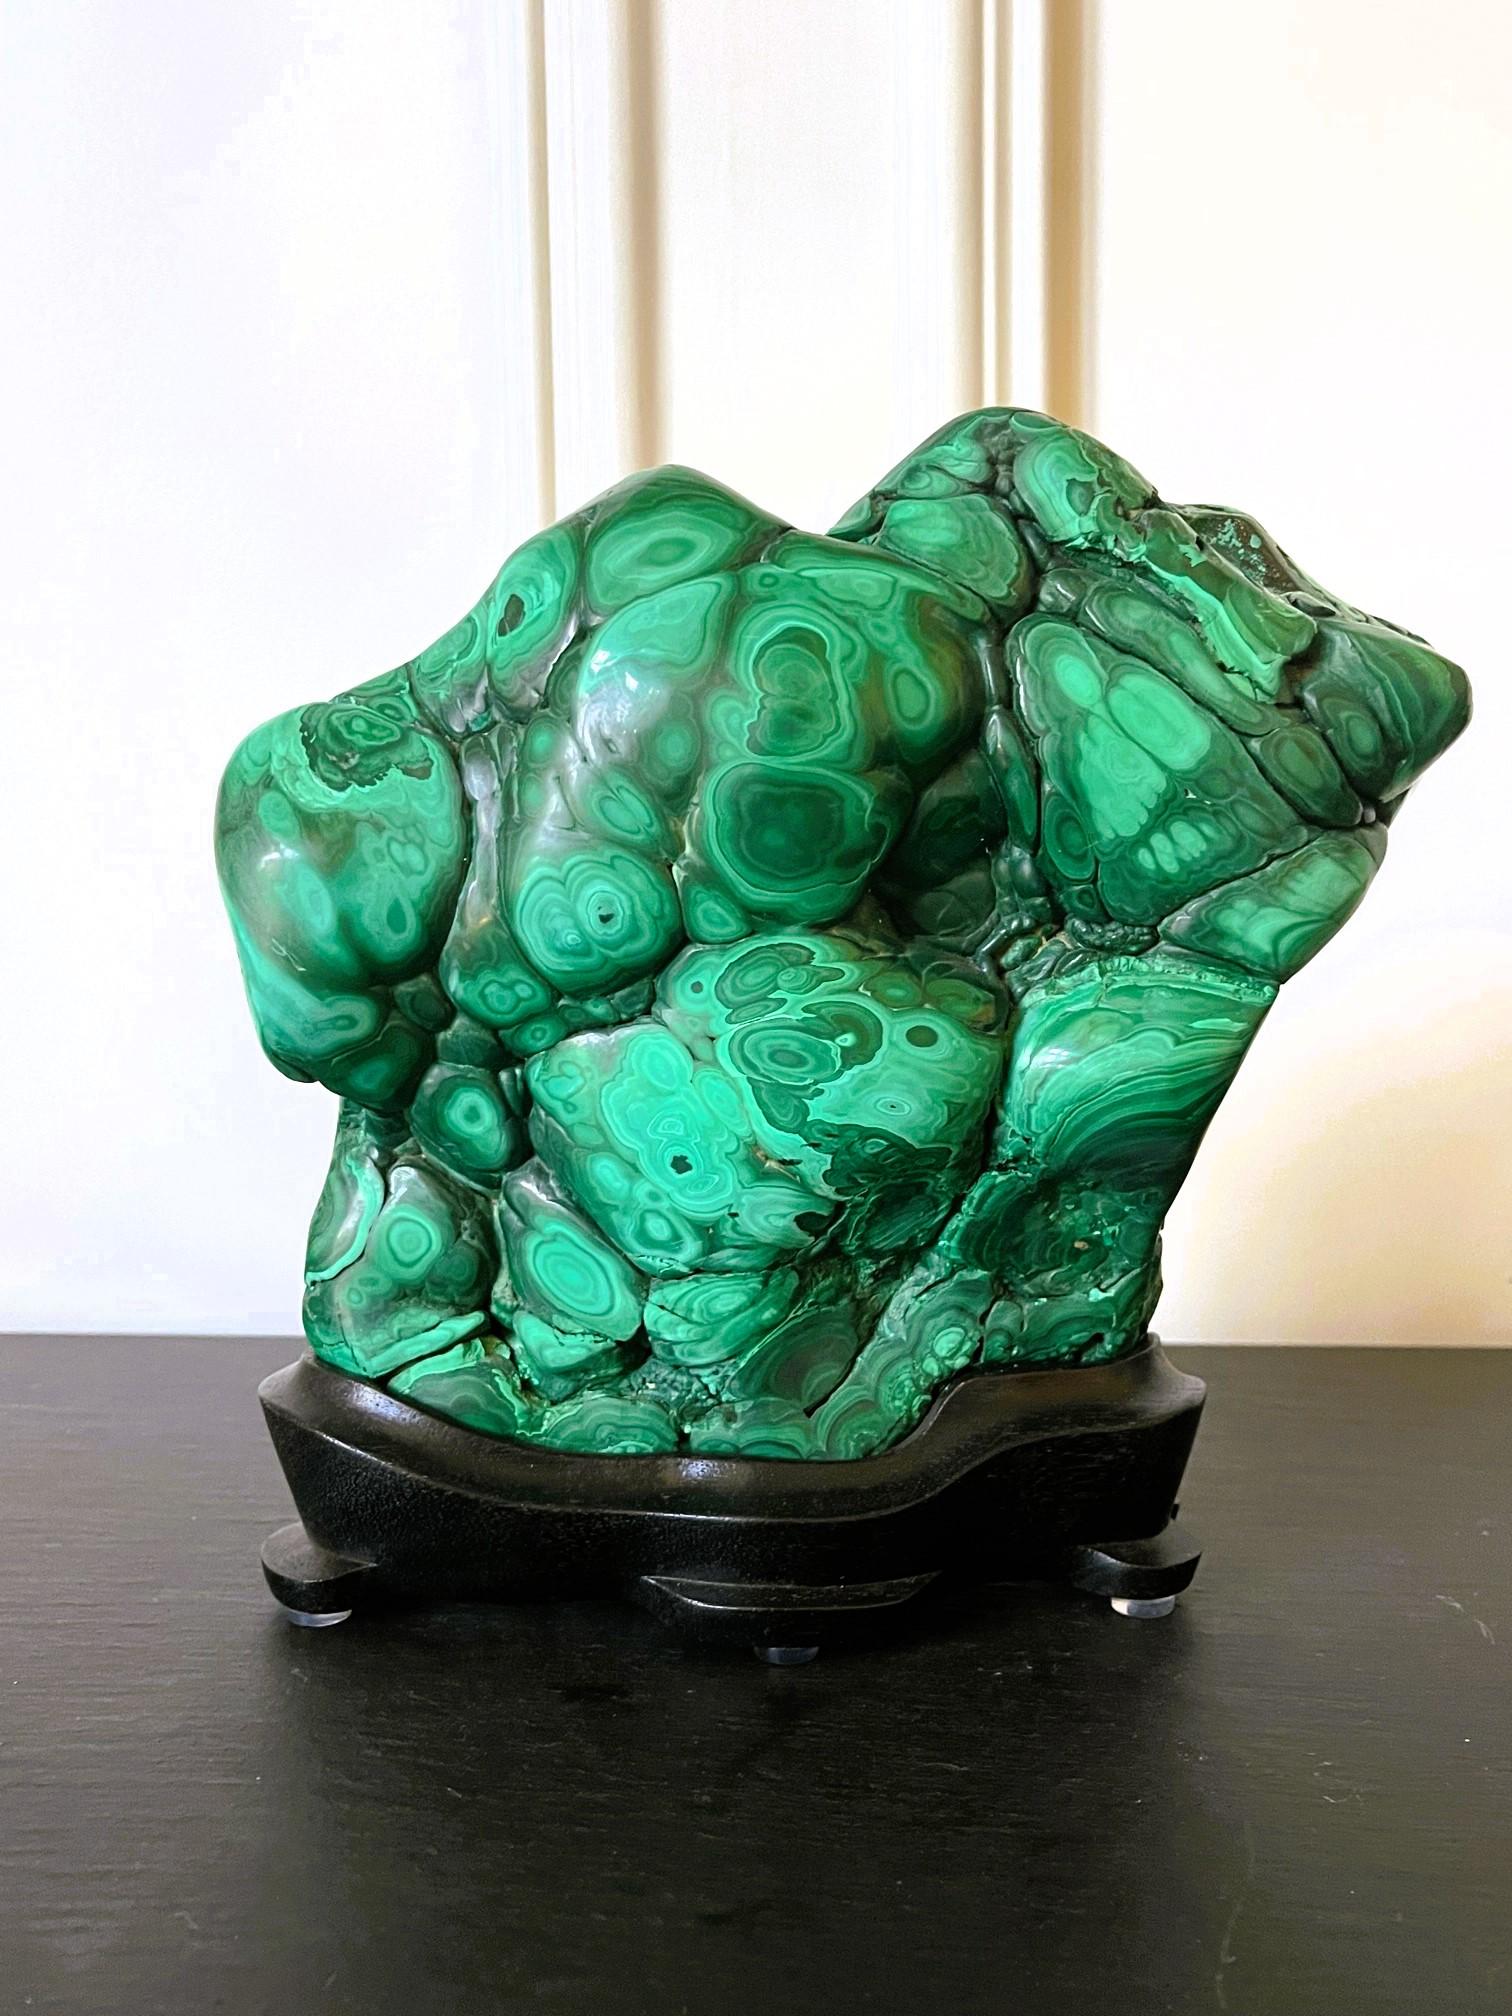 A natural malachite rock specimen with striking green and black colors fitted on a wood stand for viewing and meditating. The front and sides of the gemstone feature tight and small polished botryoidal form, revealing a beautiful, mottled pattern